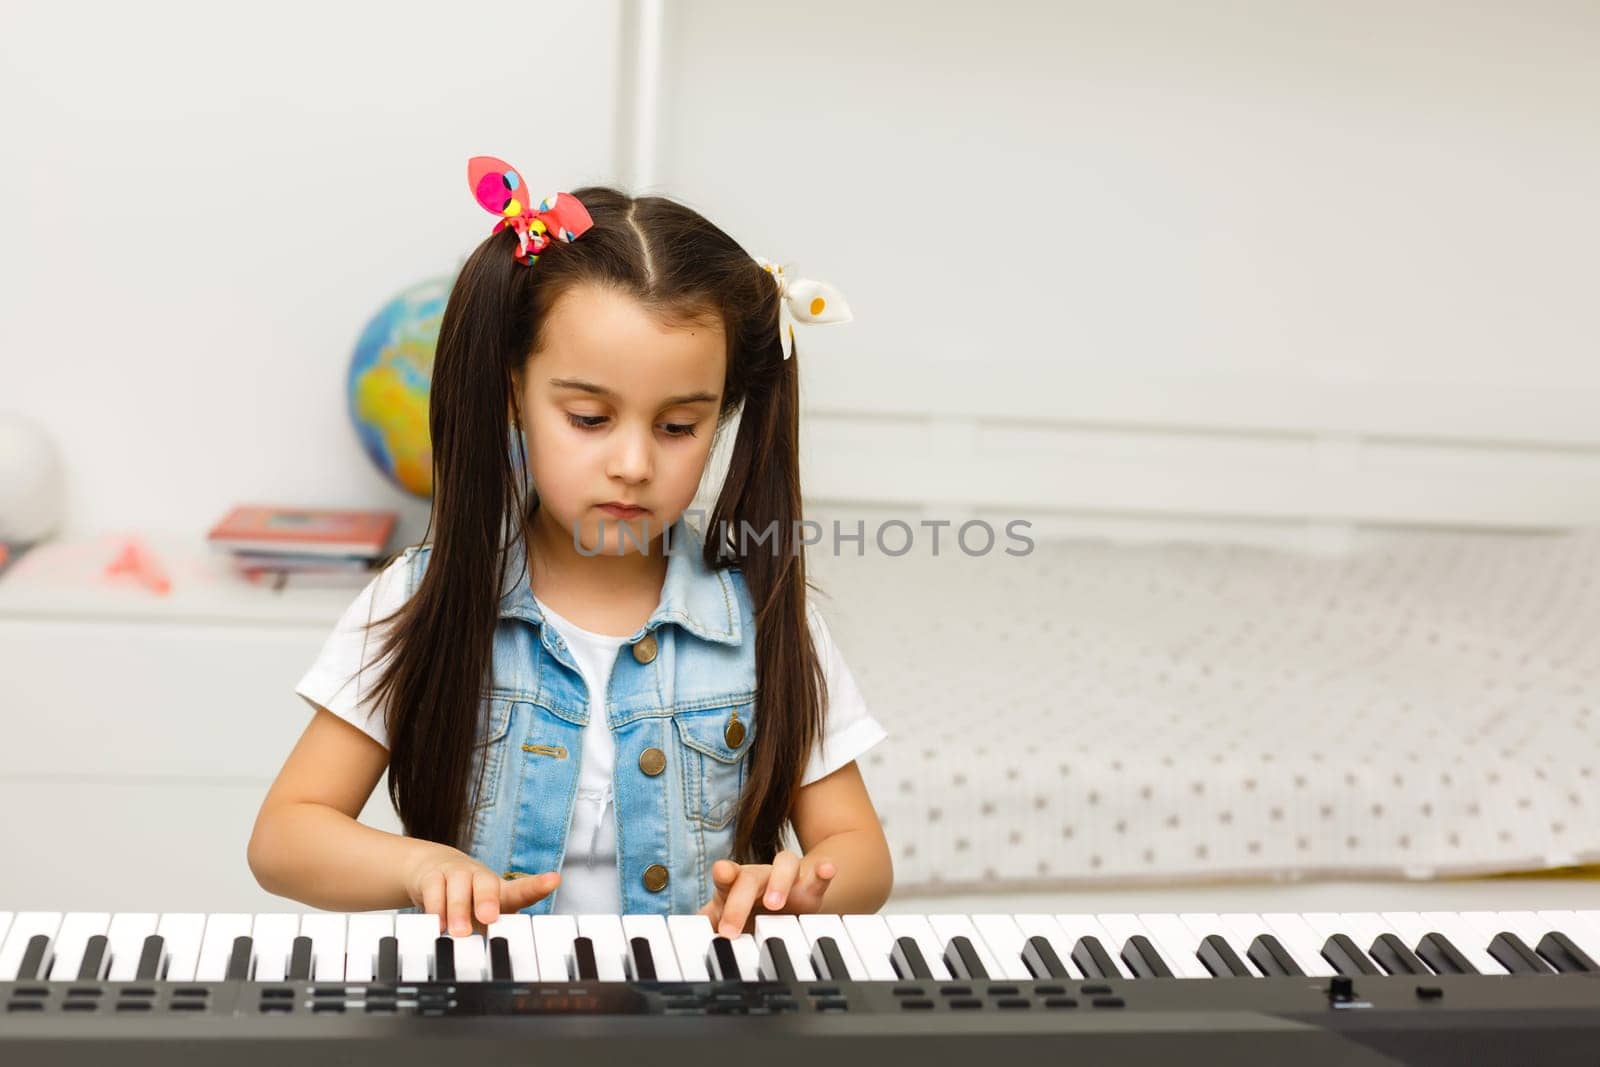 Cute little girl plays on piano, synthesizer. Training. Education. School. Aesthetic training. Elementary classroom.